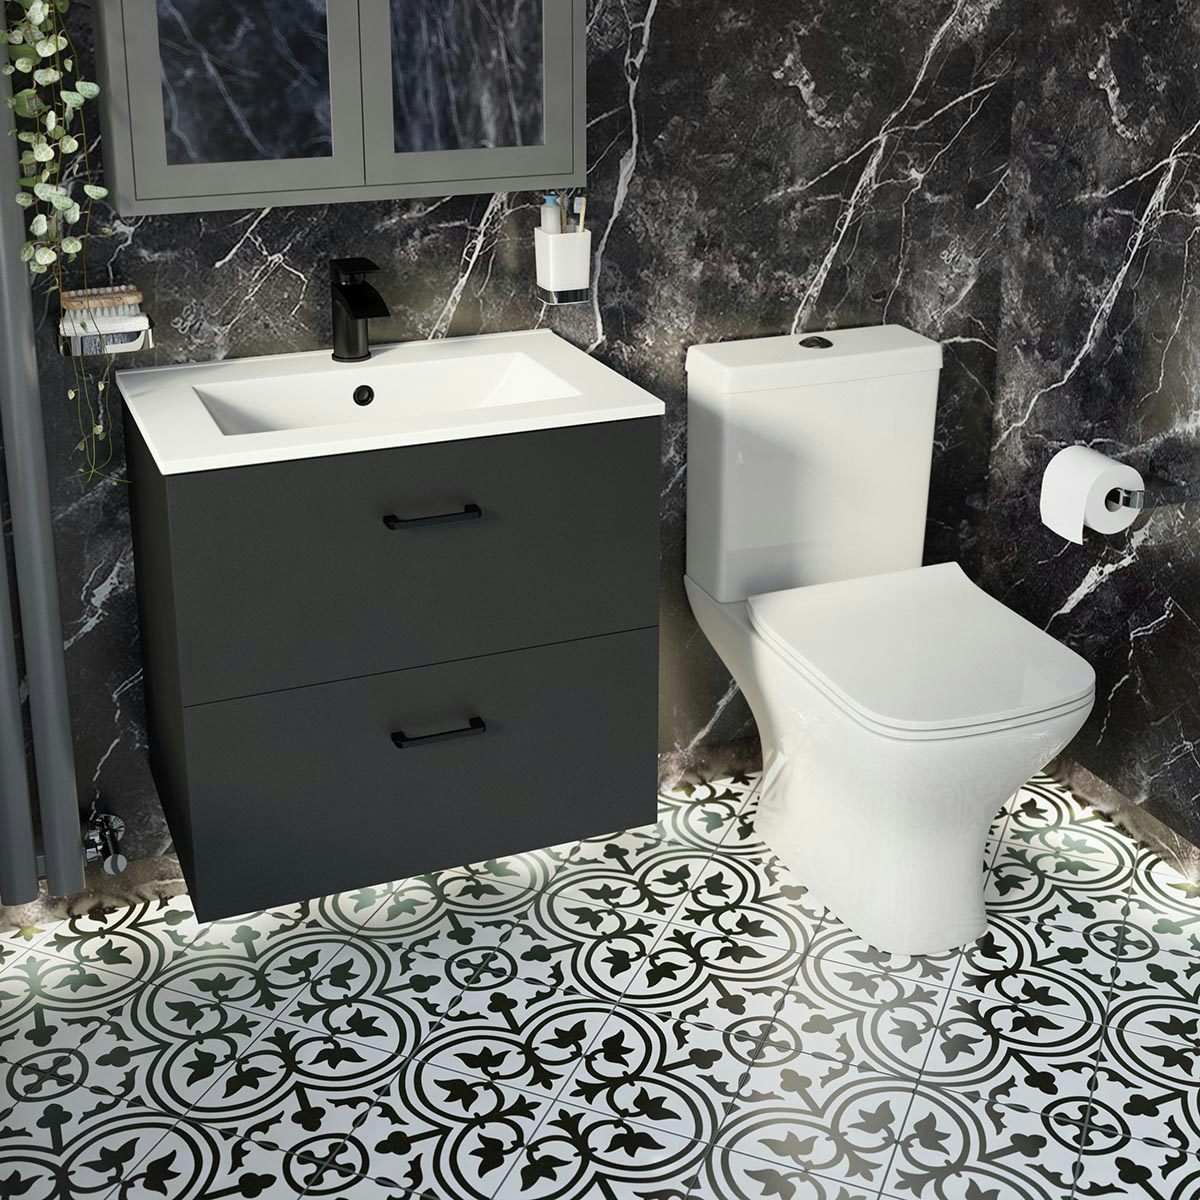 Orchard Lea soft black wall hung vanity unit with black handle 600mm and Derwent square close coupled toilet suite